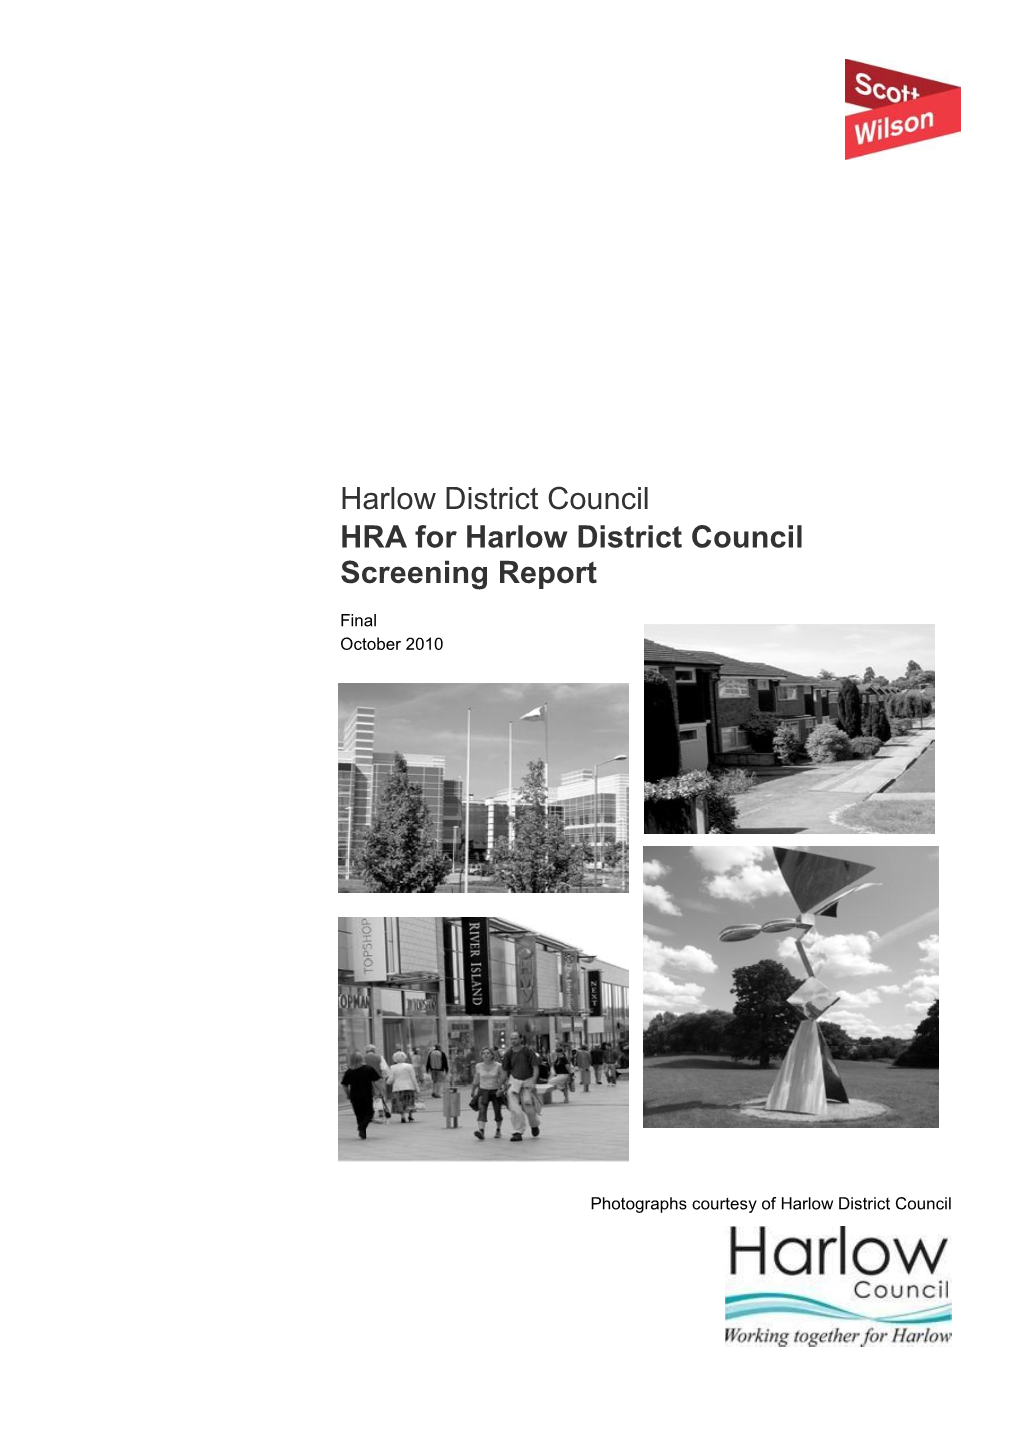 HRA of Issues and Options Screening Report 4 October 2010